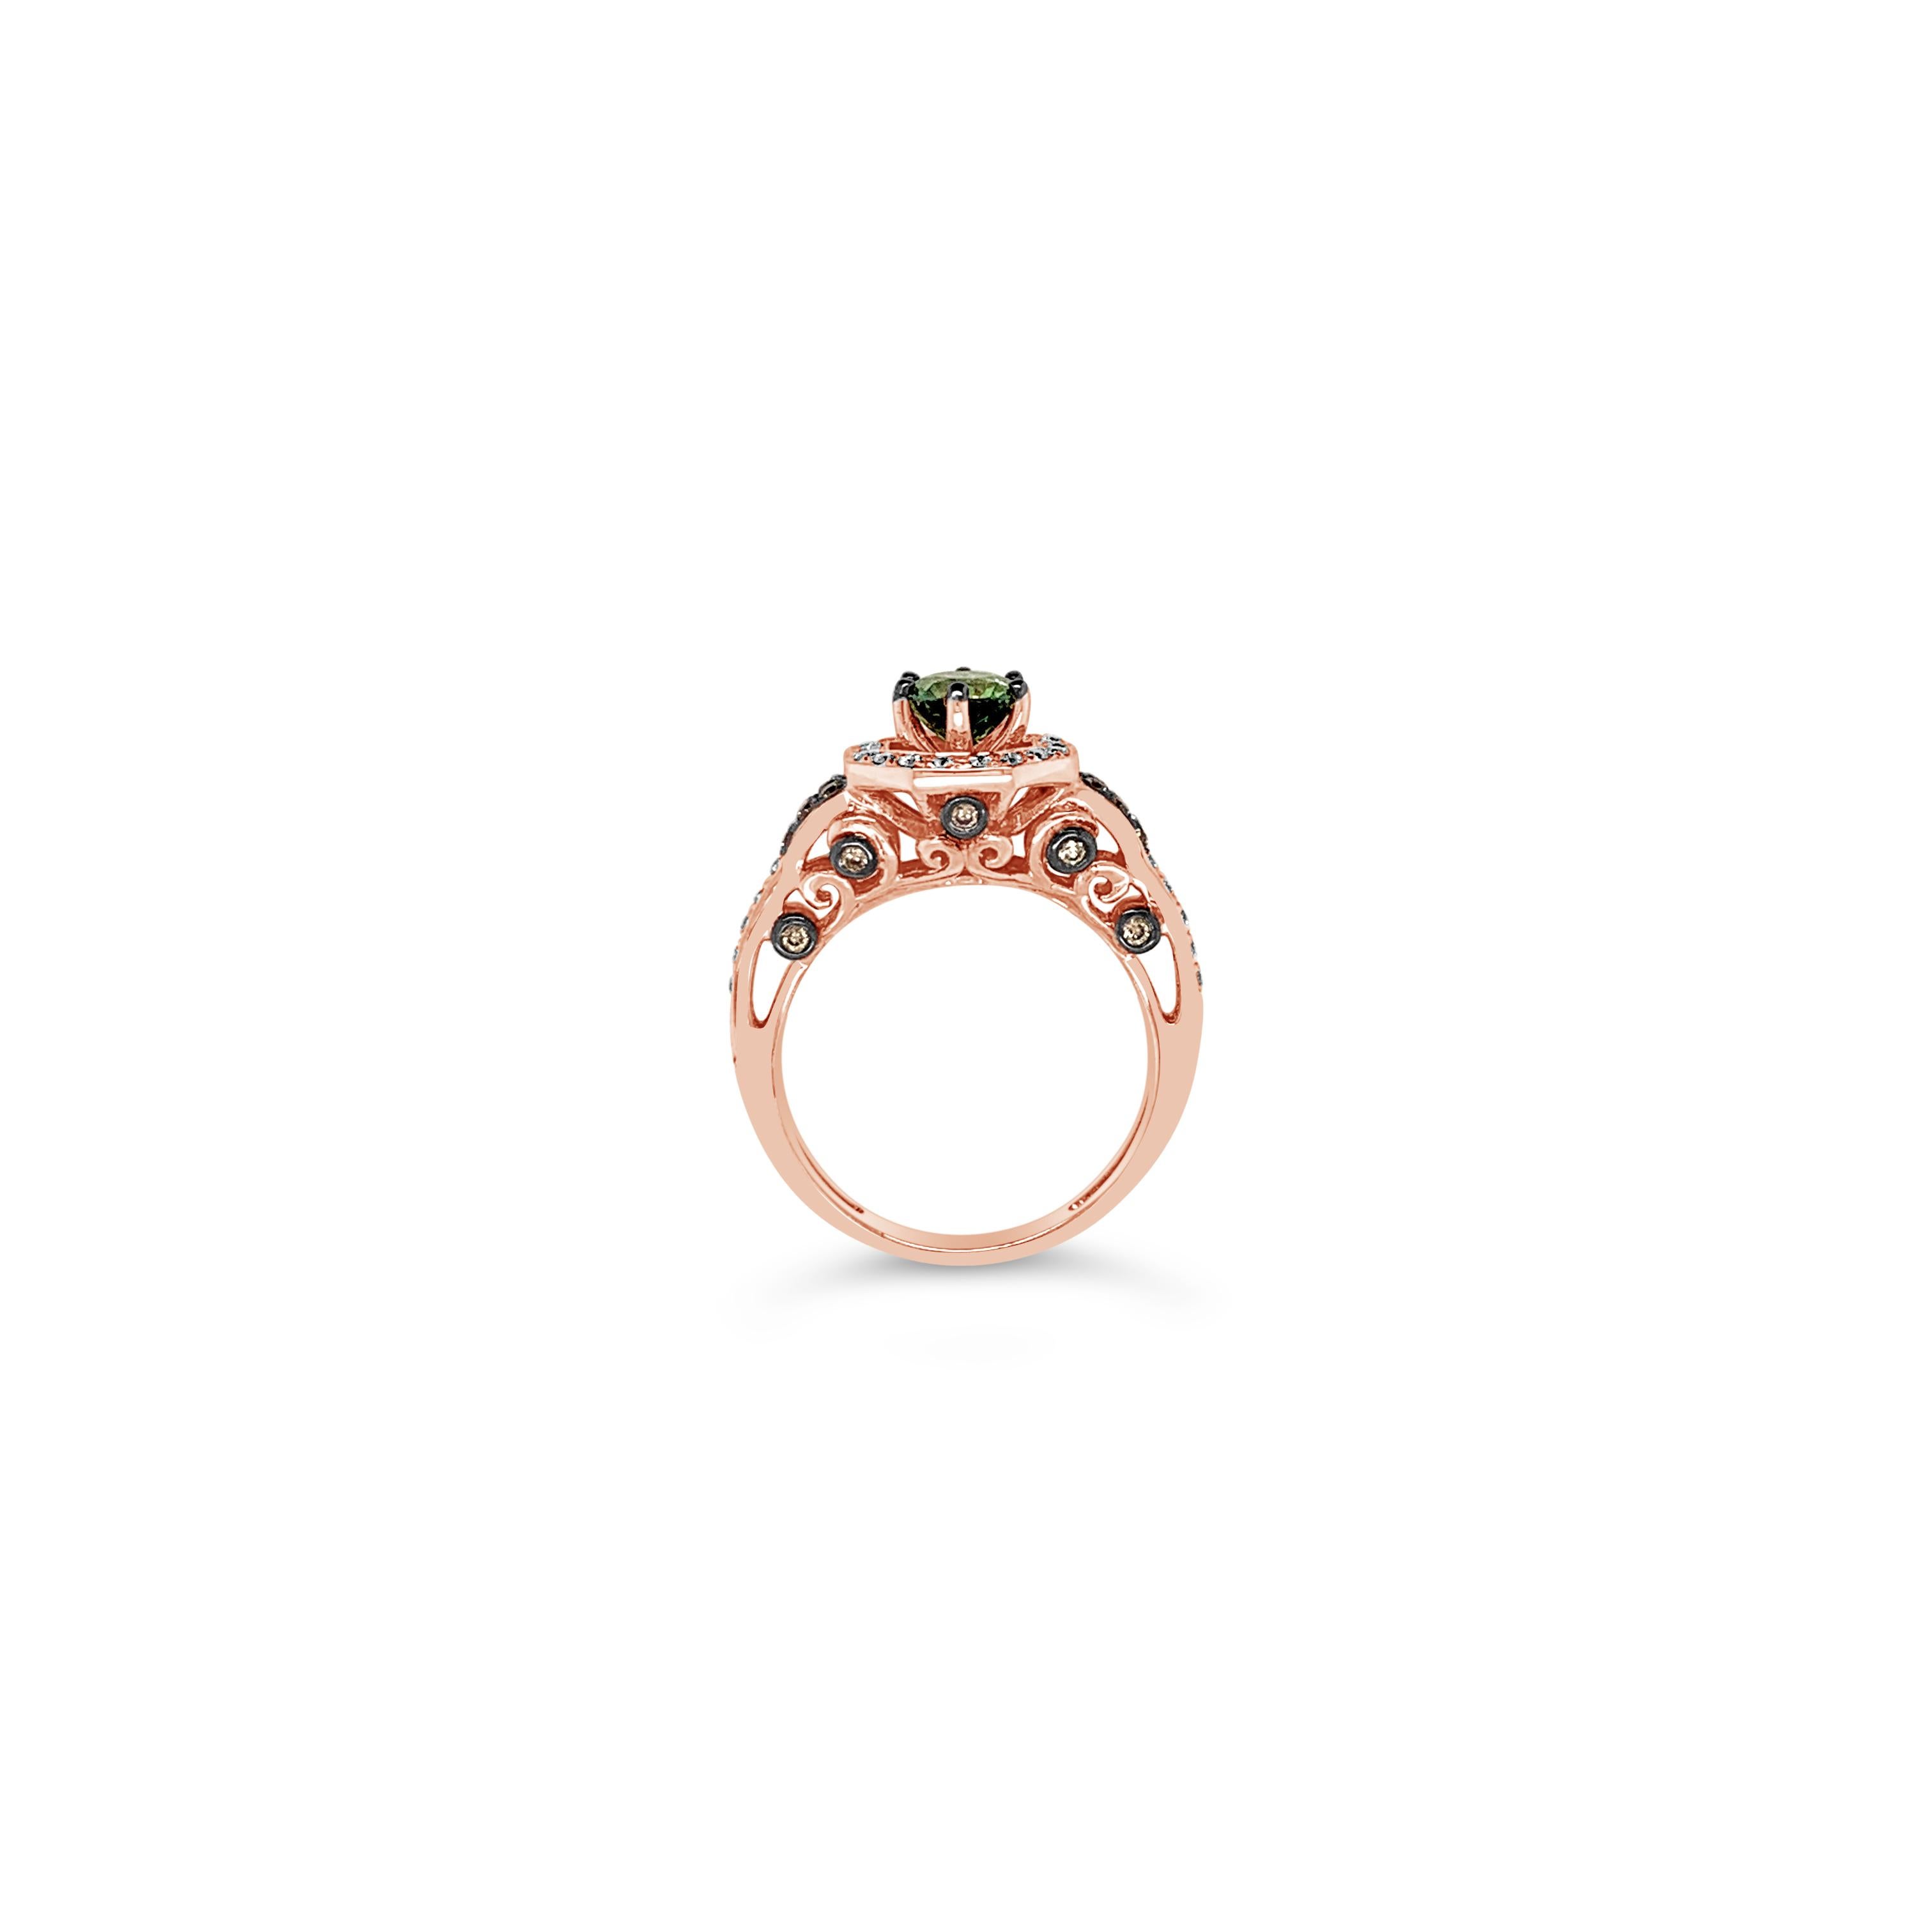 Le Vian Bridal® Ring featuring 0.94 cts. Green Sapphire, 0.23 cts. Chocolate Diamonds® , 0.31 cts. Vanilla Diamonds® set in 14K Strawberry Gold®

Diamonds Breakdown:
.31 cts White Diamonds
.23 cts Brown Diamonds

Gems Breakdown:
.94 cts Green